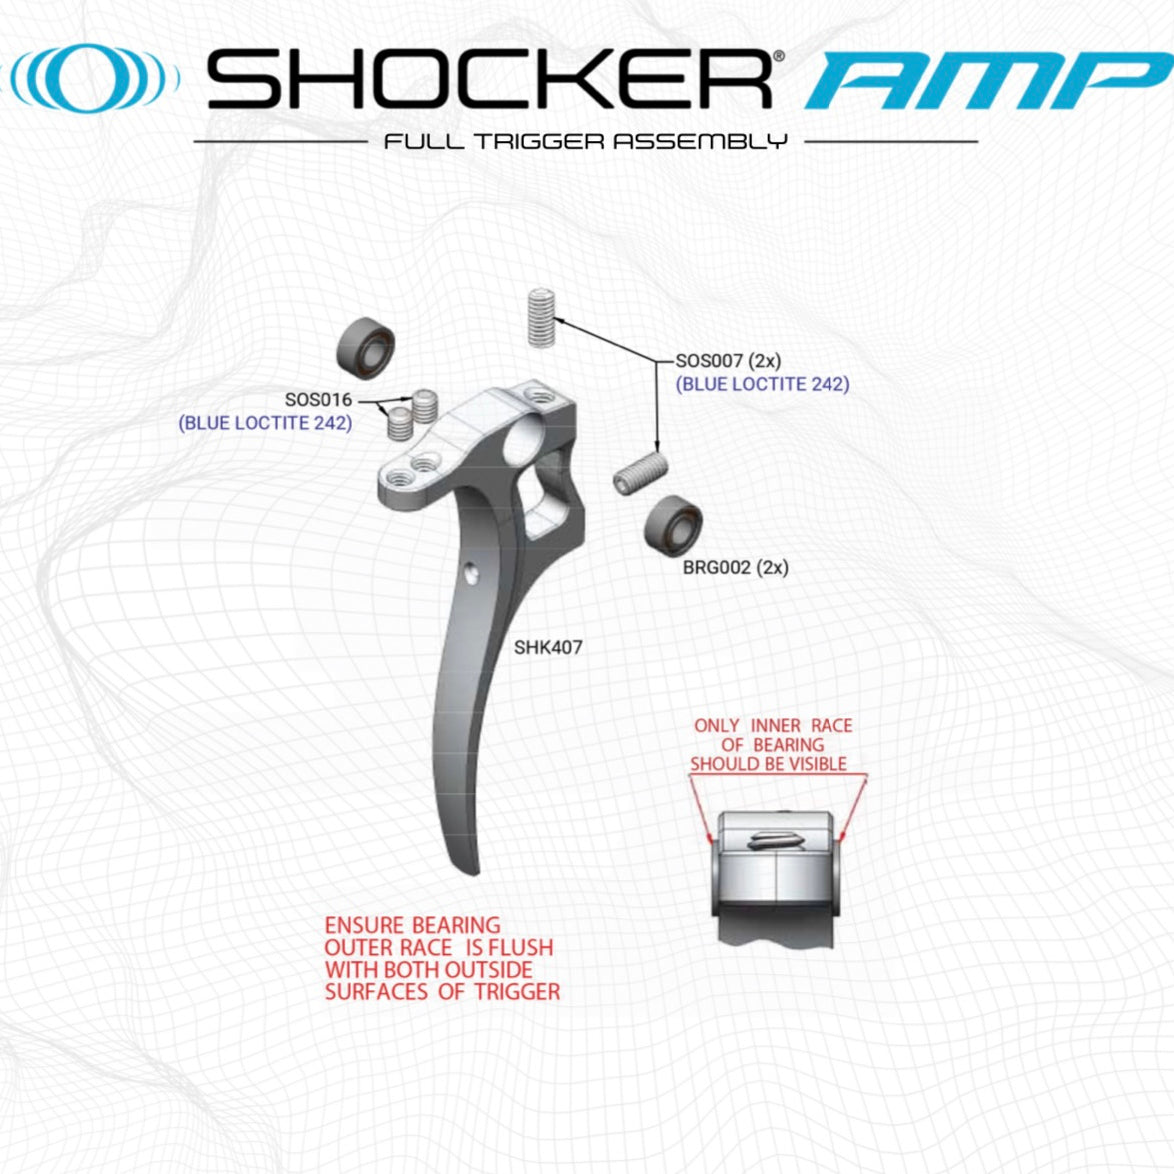 SP Shocker Amp Full Trigger Assembly Parts List - Pick the Part You Need!